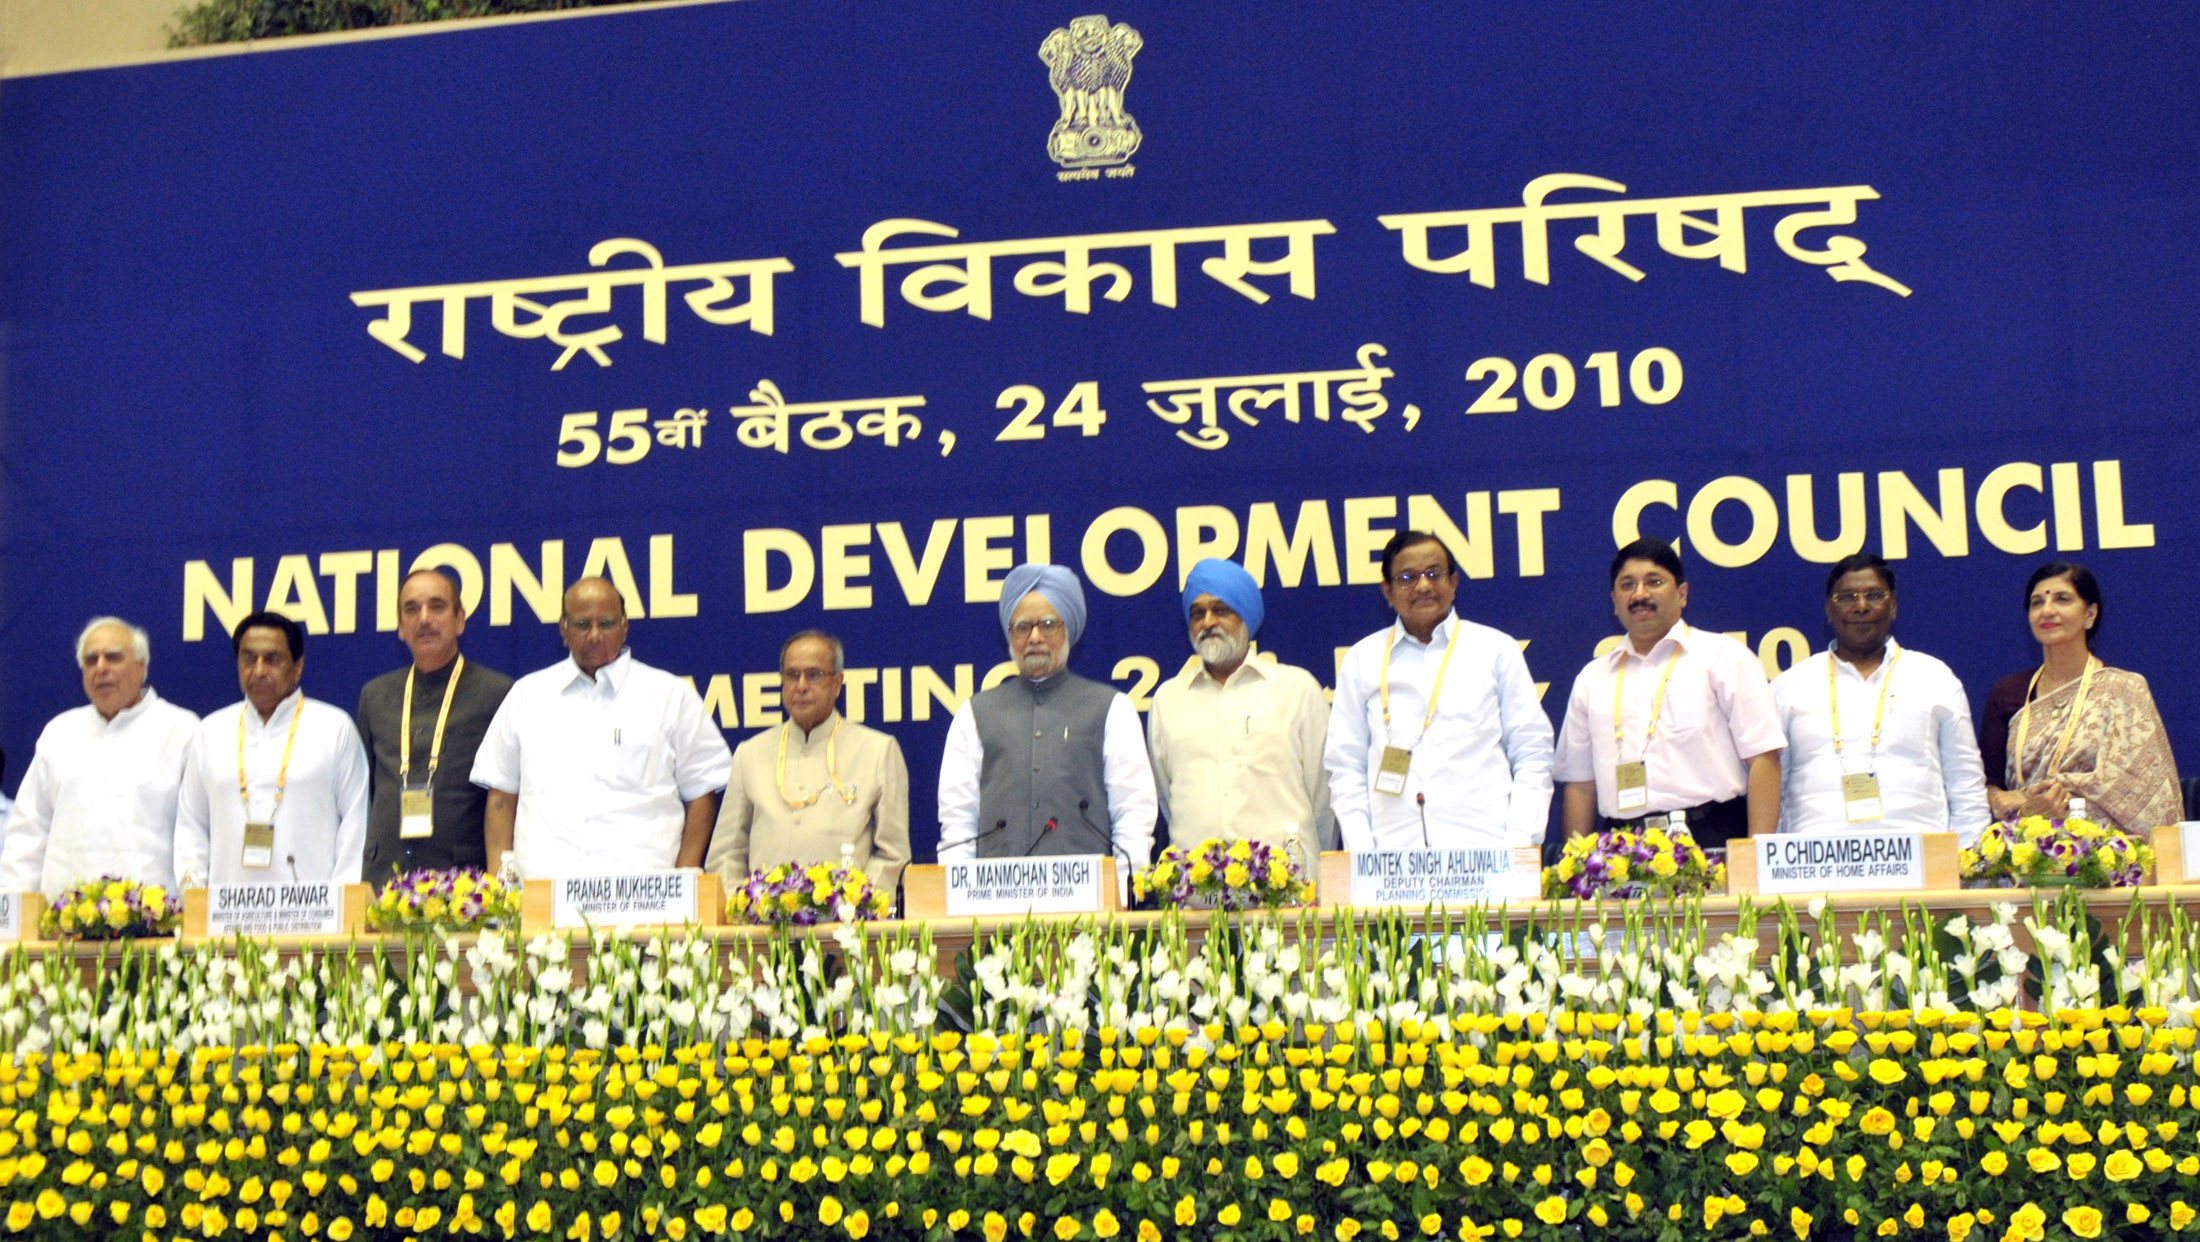 The Prime Minister, Dr. Manmohan Singh addressing the 55th National Development Council Meeting, in New Delhi on July 24, 2010.